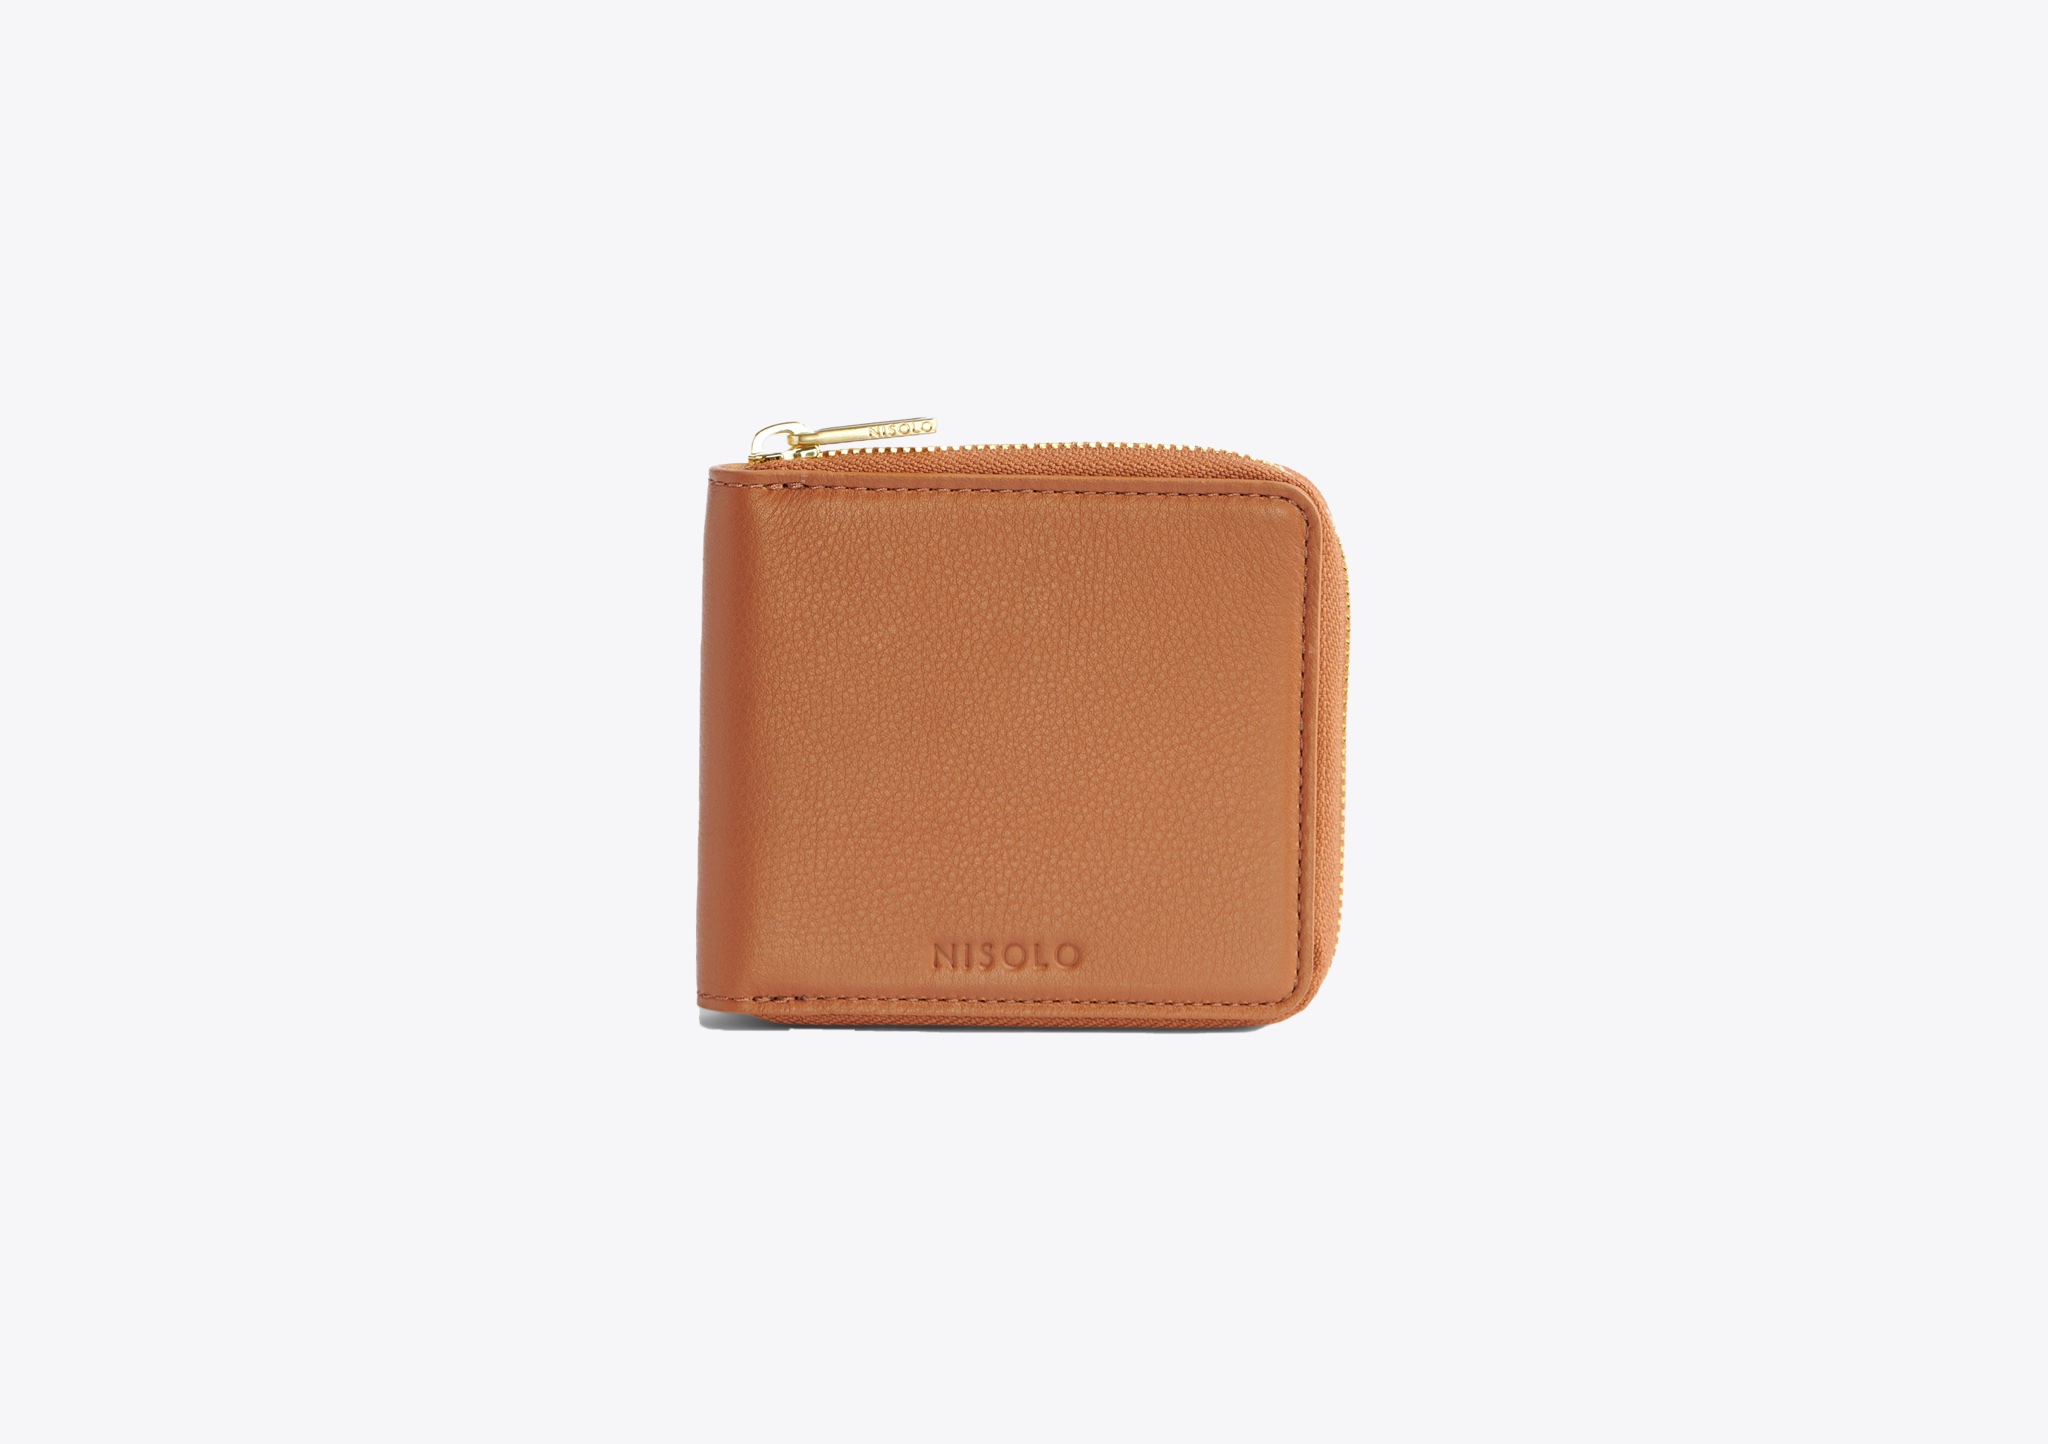 Nisolo Remi Zip Wallet Caramel - Every Nisolo product is built on the foundation of comfort, function, and design. 